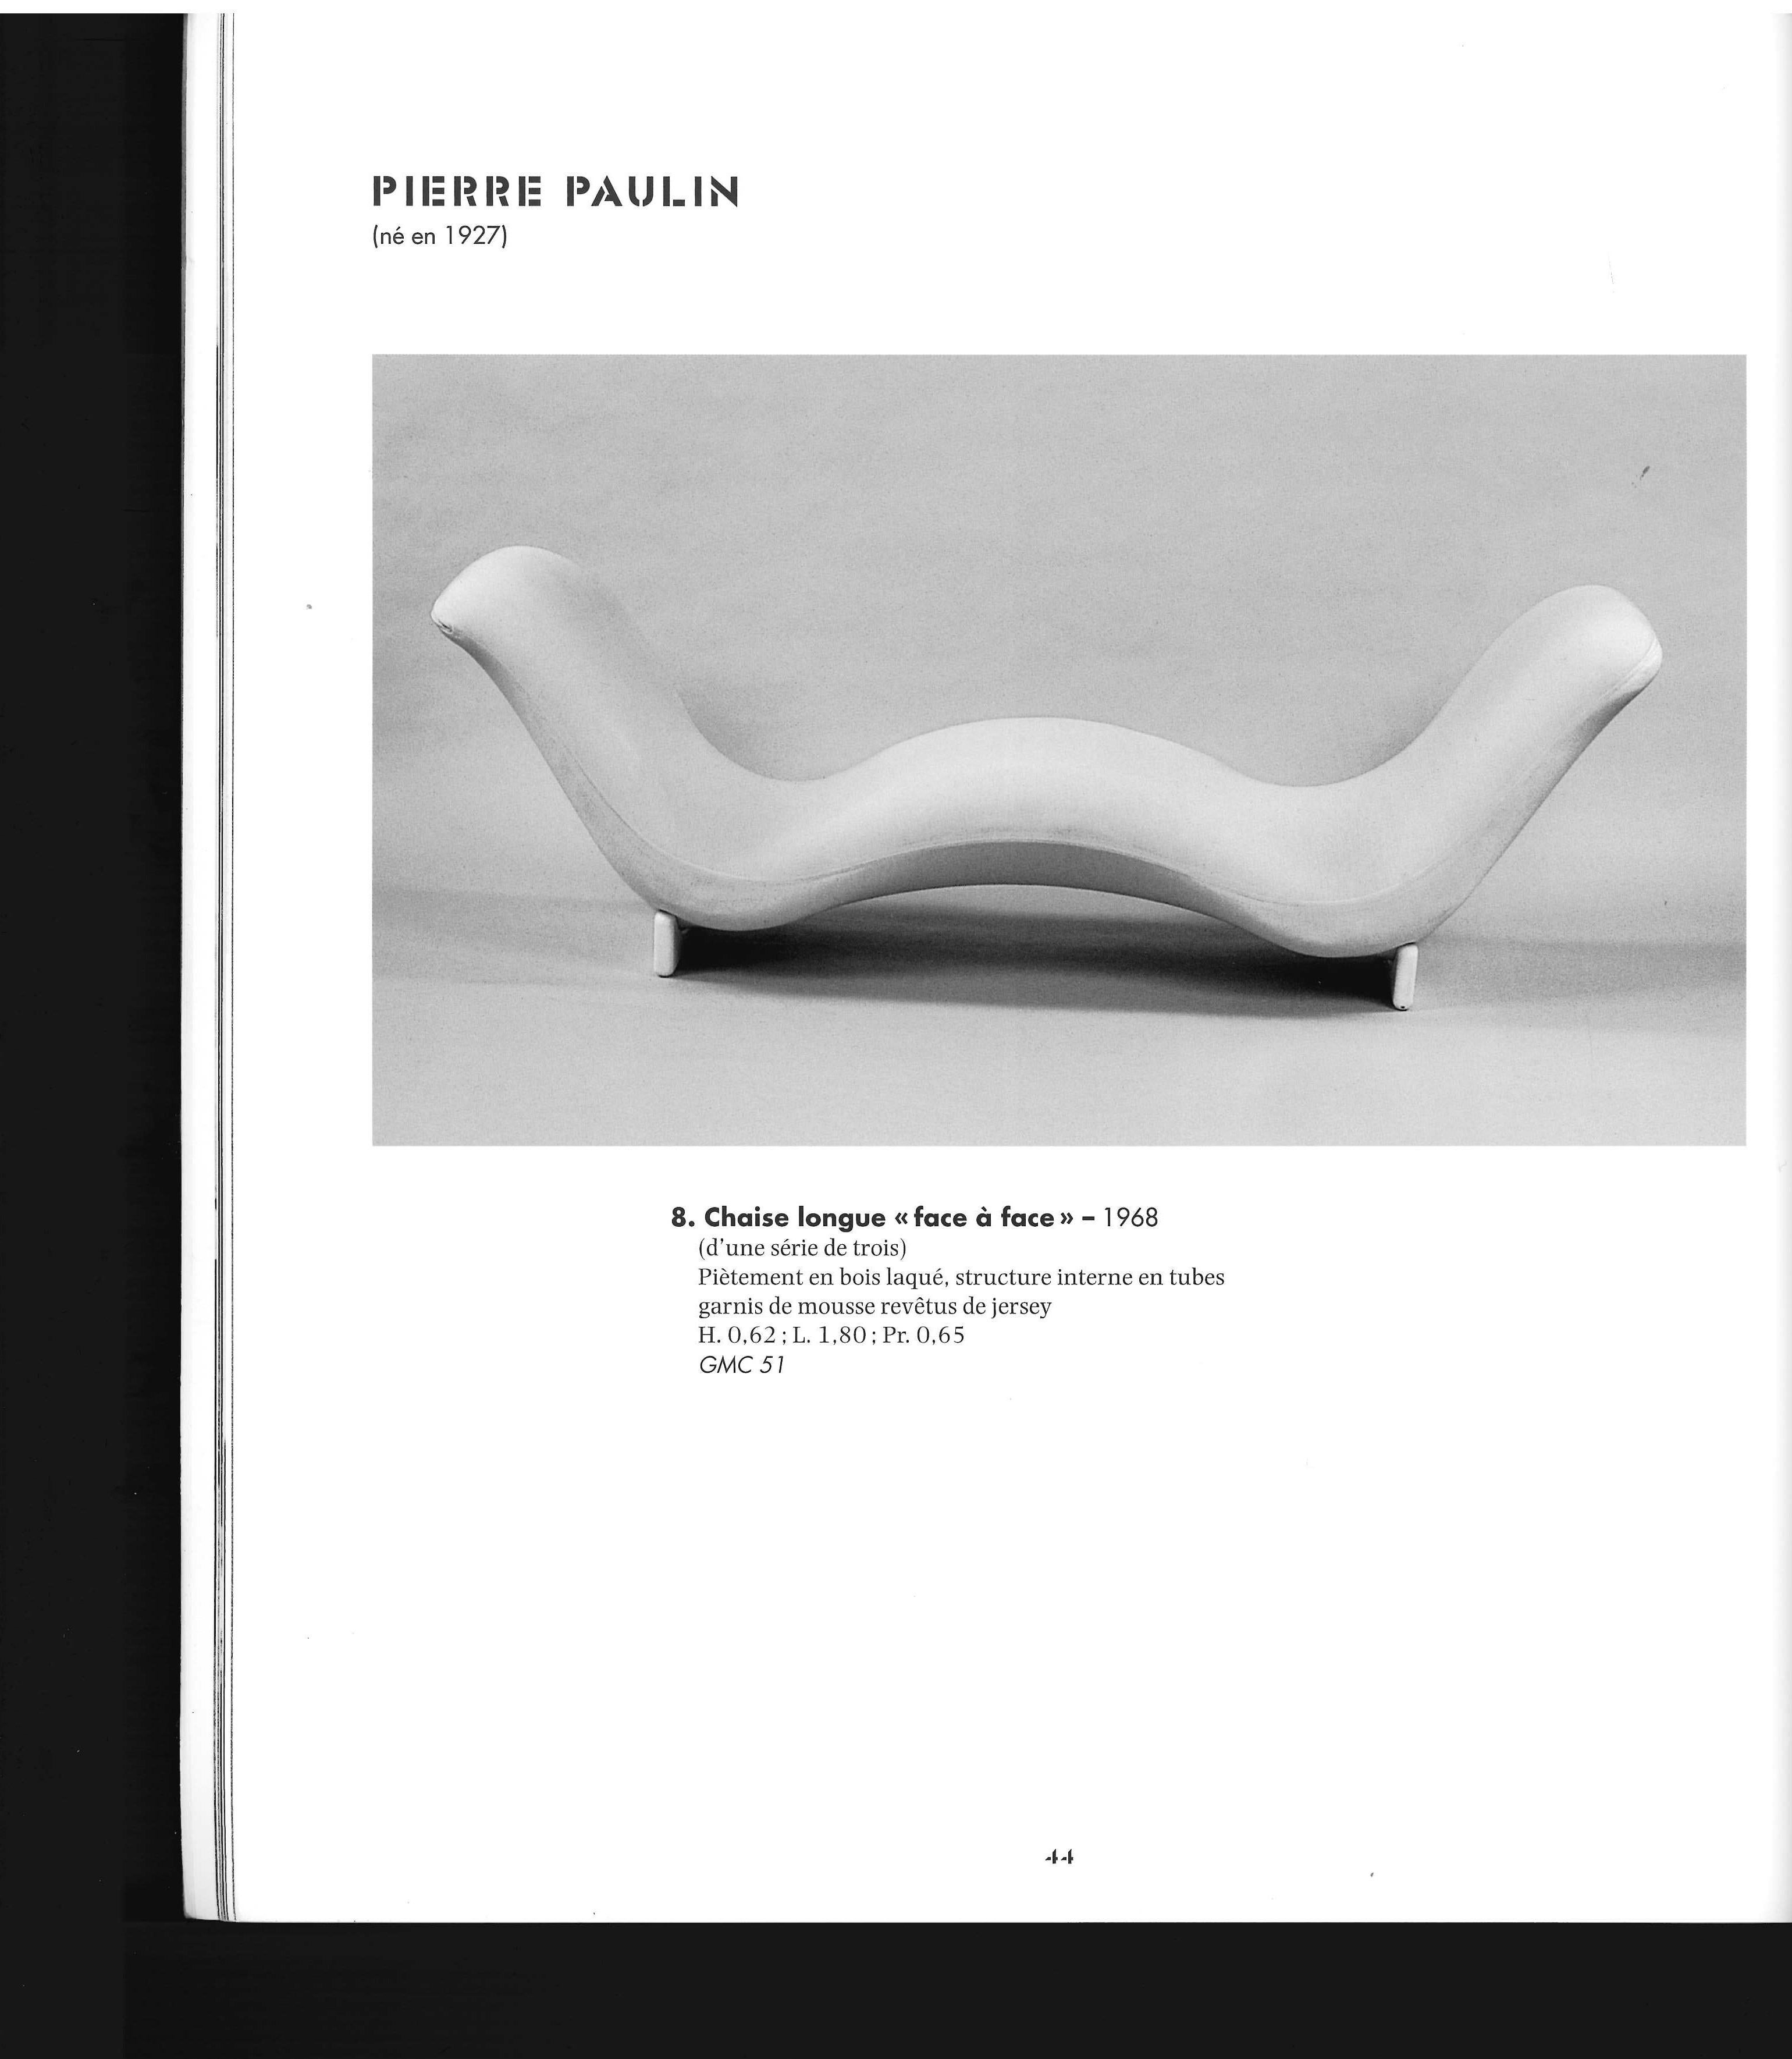 Catalogue of an exhibition of 161 pieces of furniture made by some of France's most influential designers in the final third of the 20th century and the early years of 21st century, some of those included are - Claude & Francois Xavier Lalanne,